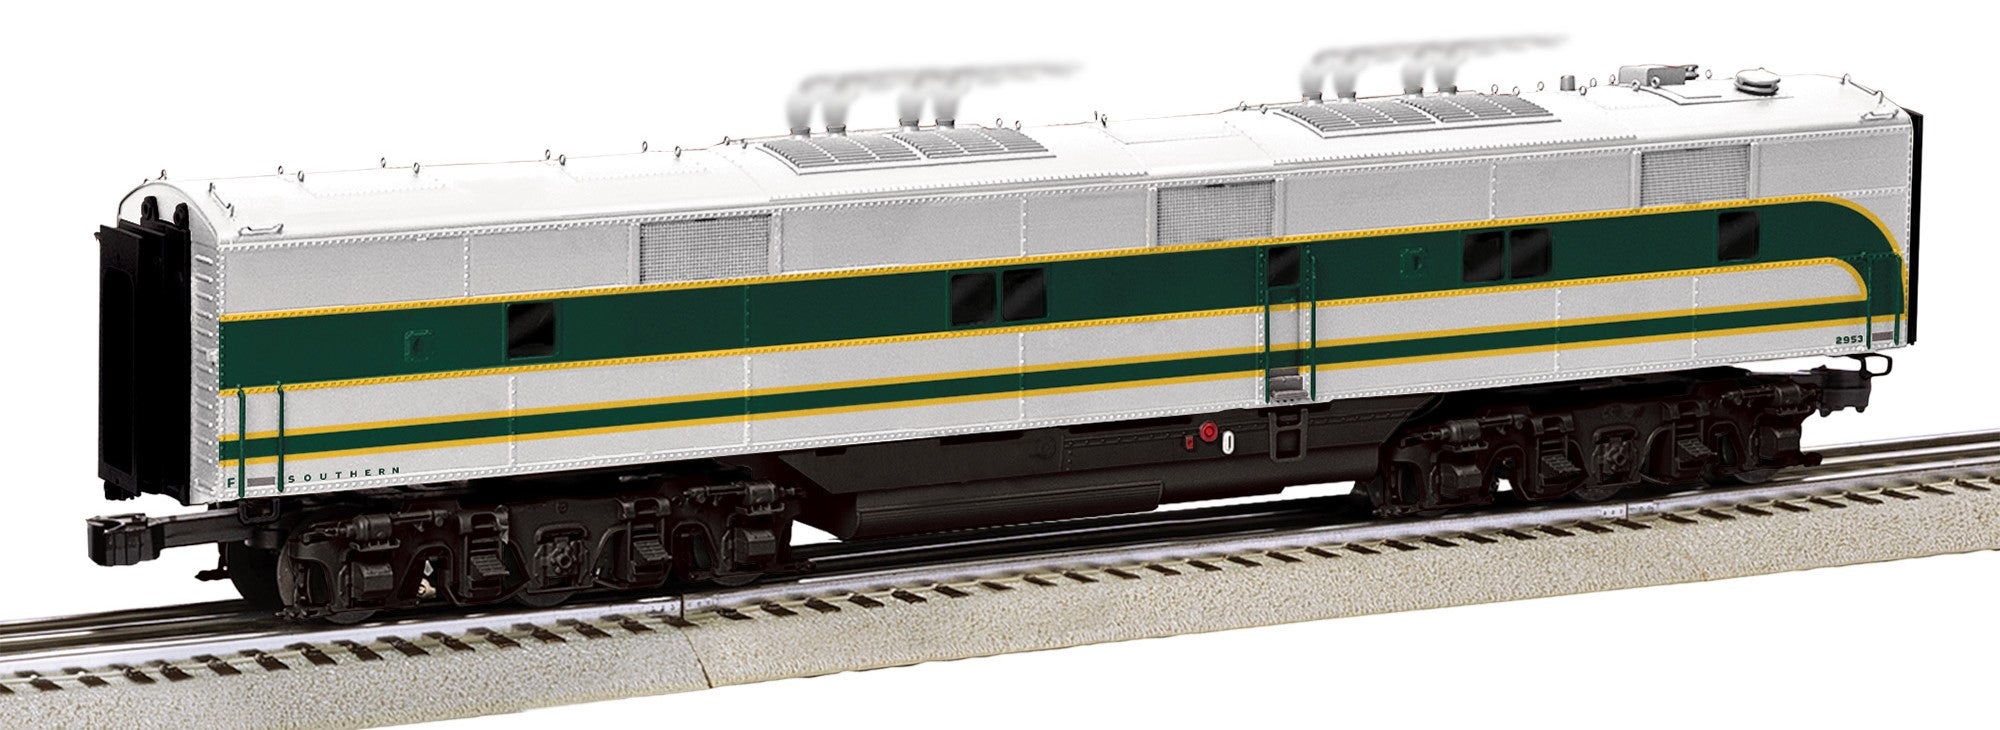 Lionel 2433649 - Legacy E6B SuperBass "Southern" #2953